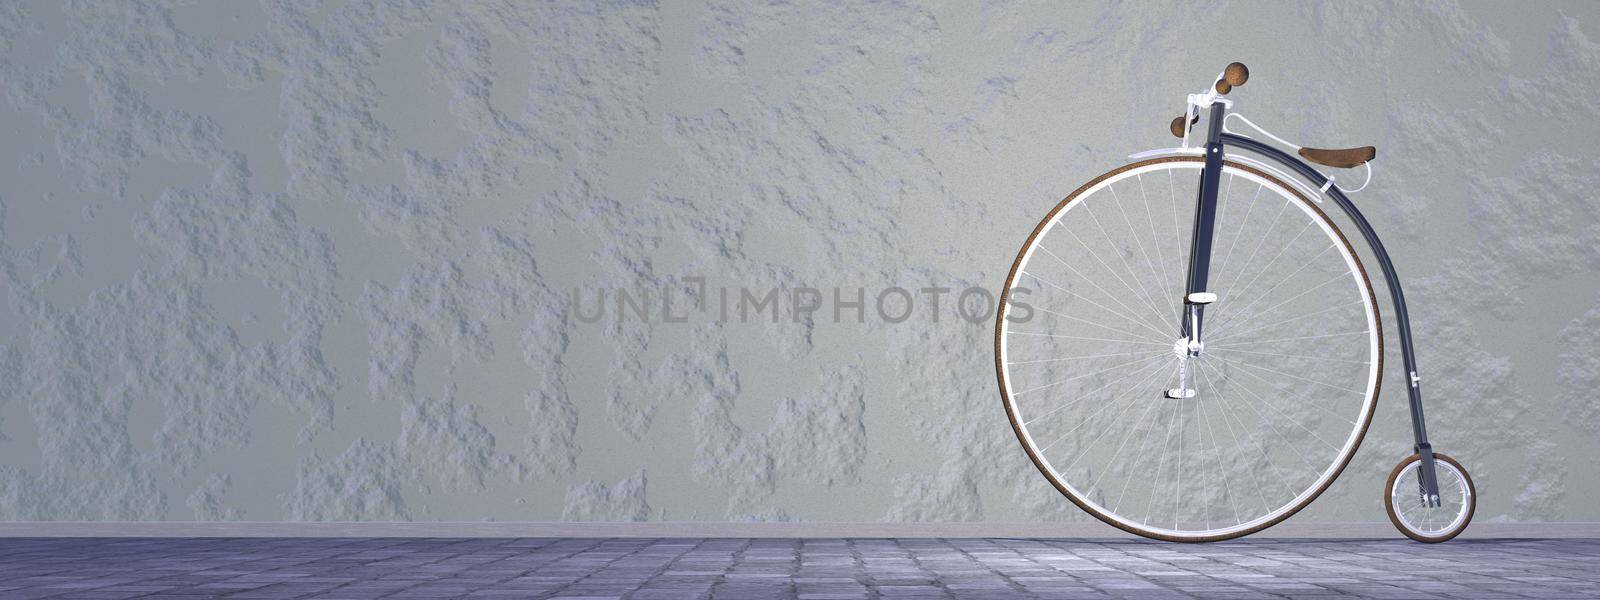 Penny-farthing or high wheel bicycle - 3D render by Elenaphotos21